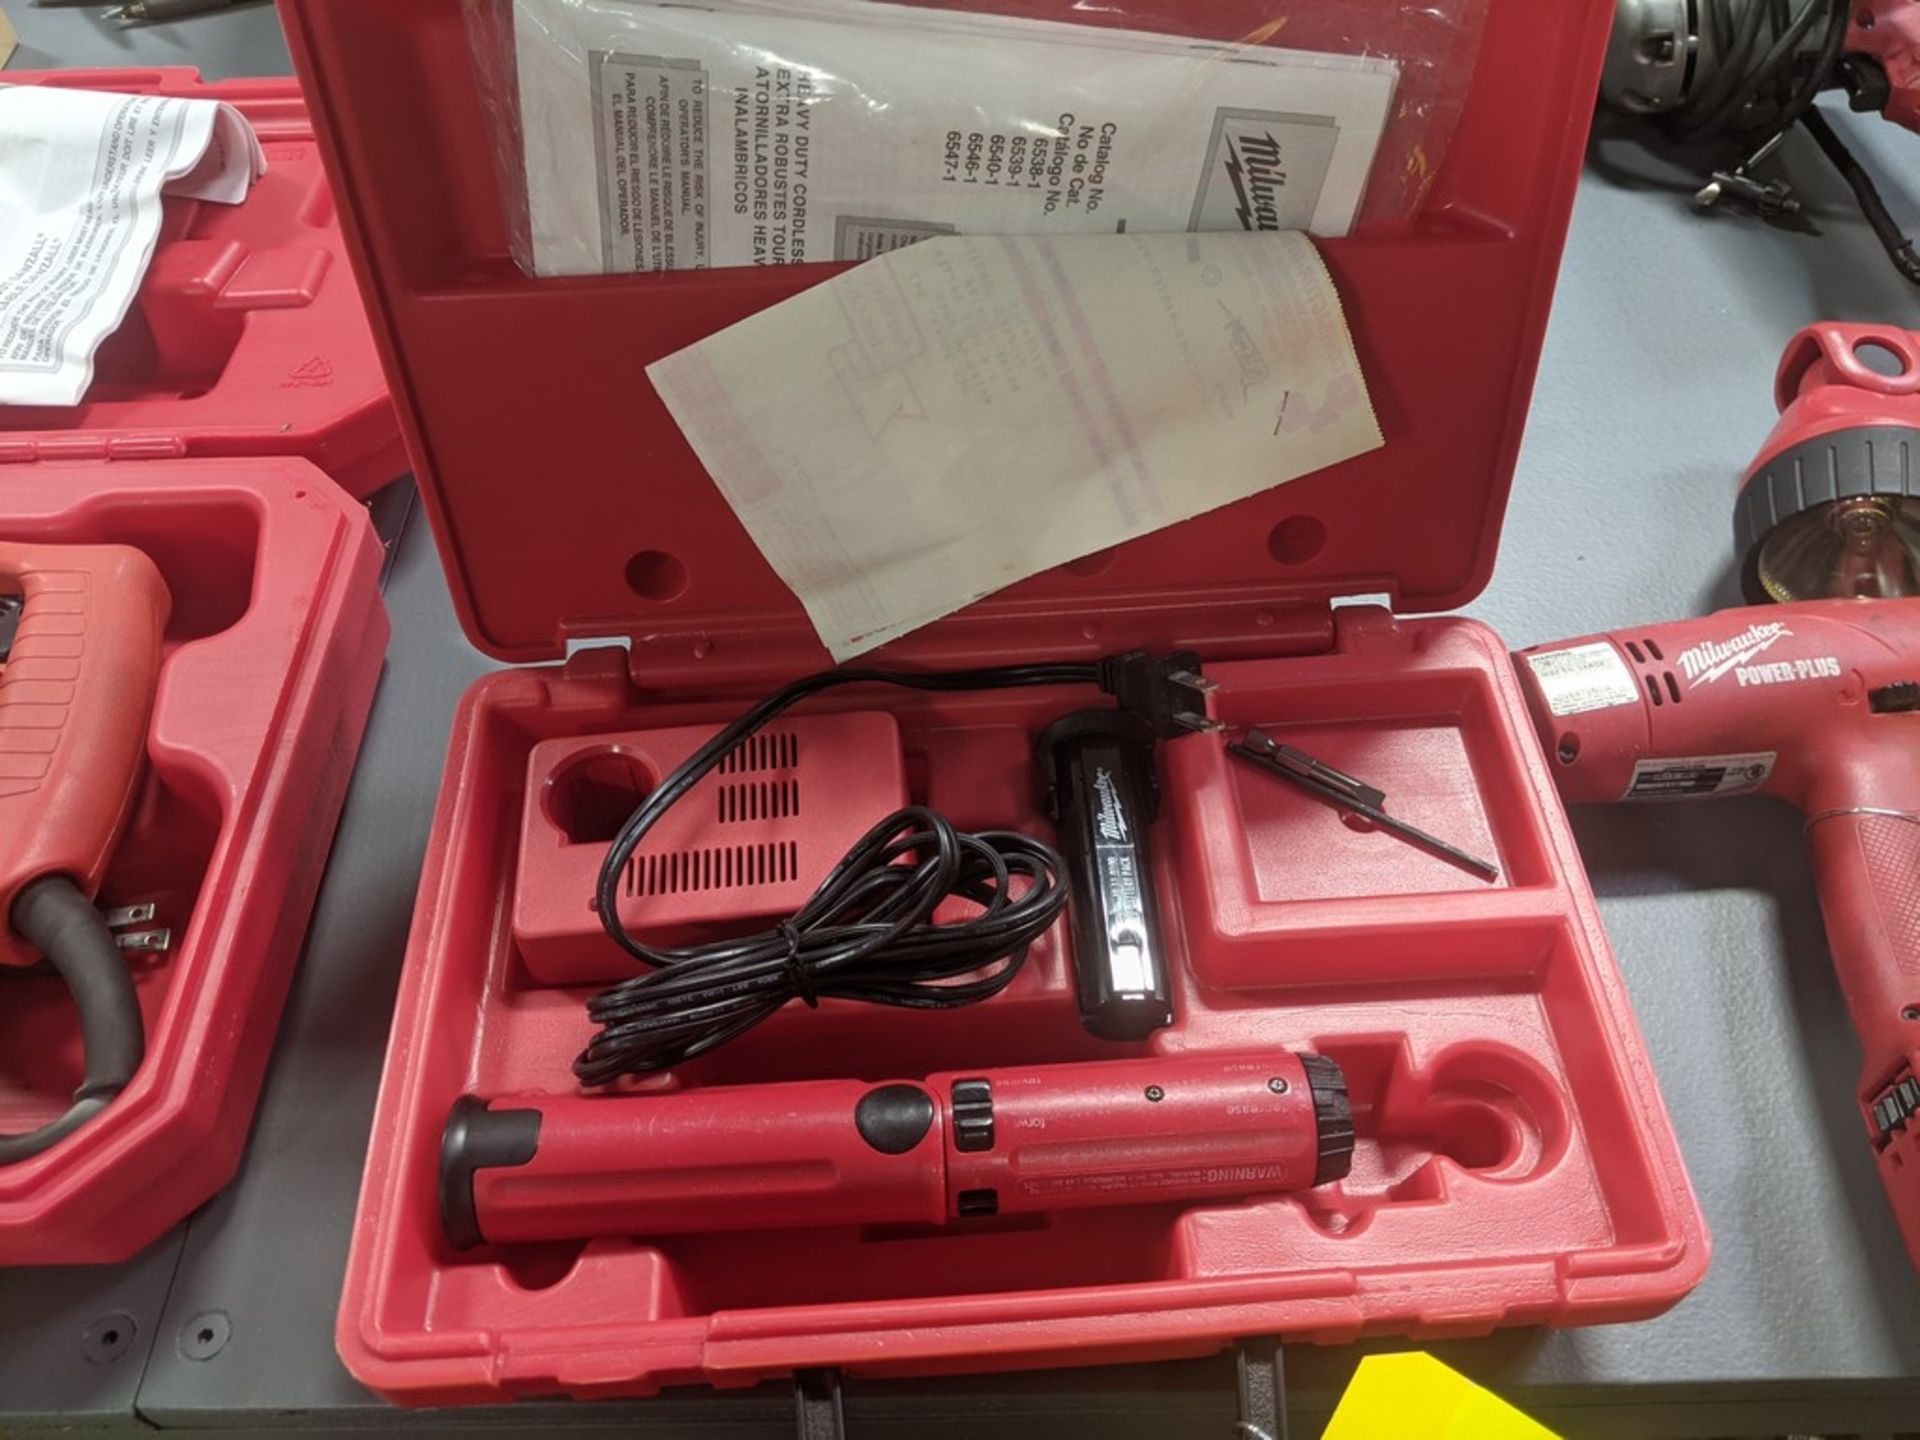 MILWAUKEE HEAVY DUTY CORDLESS SCREWDIRVER, BATTERY, CHARGER, CASE